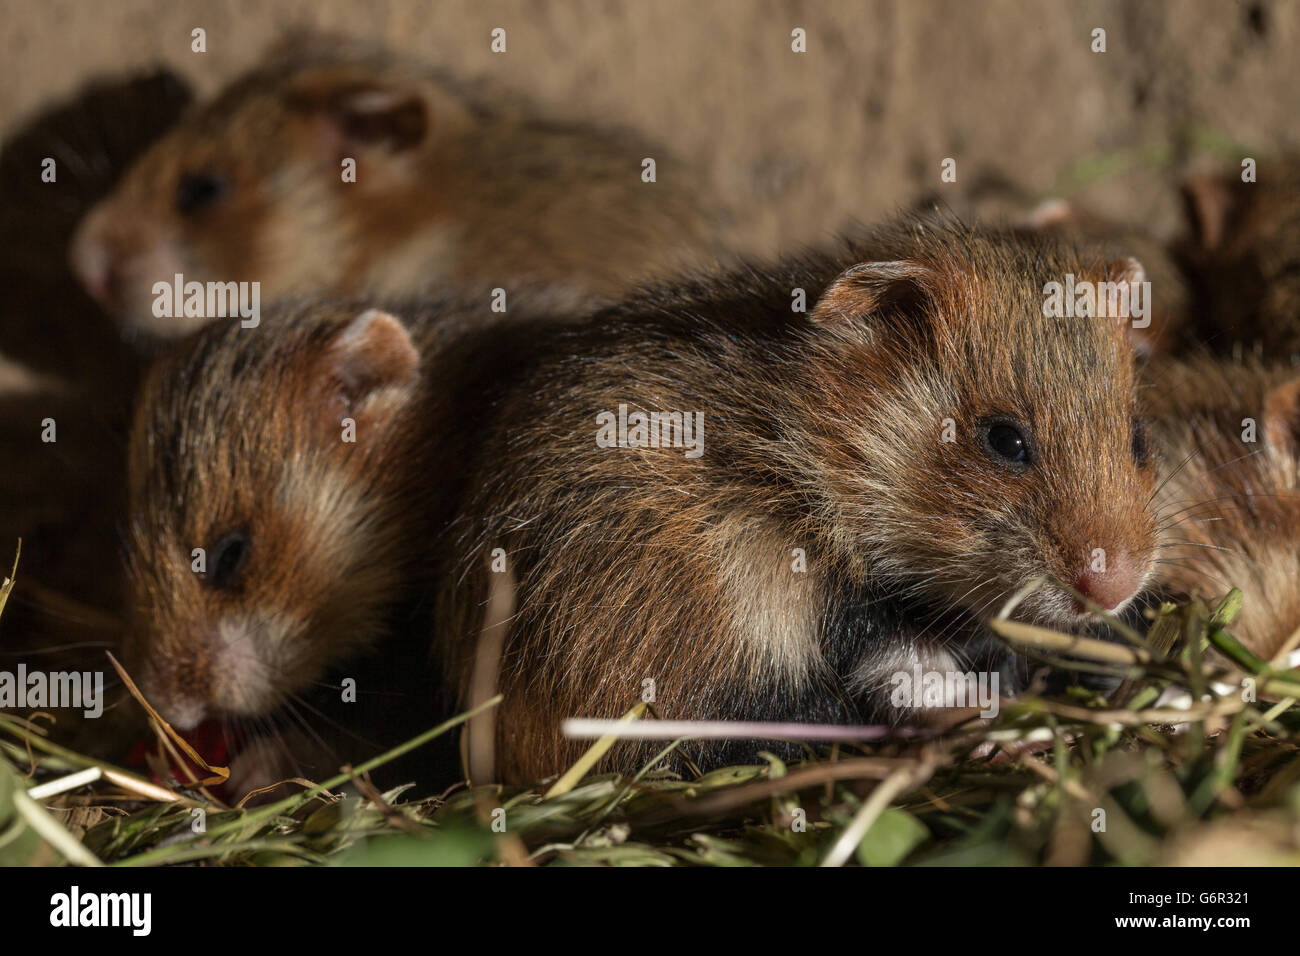 Grand hamster, Youngs, 17 jours, au terrier, europe, (Cricetus cricetus) Banque D'Images